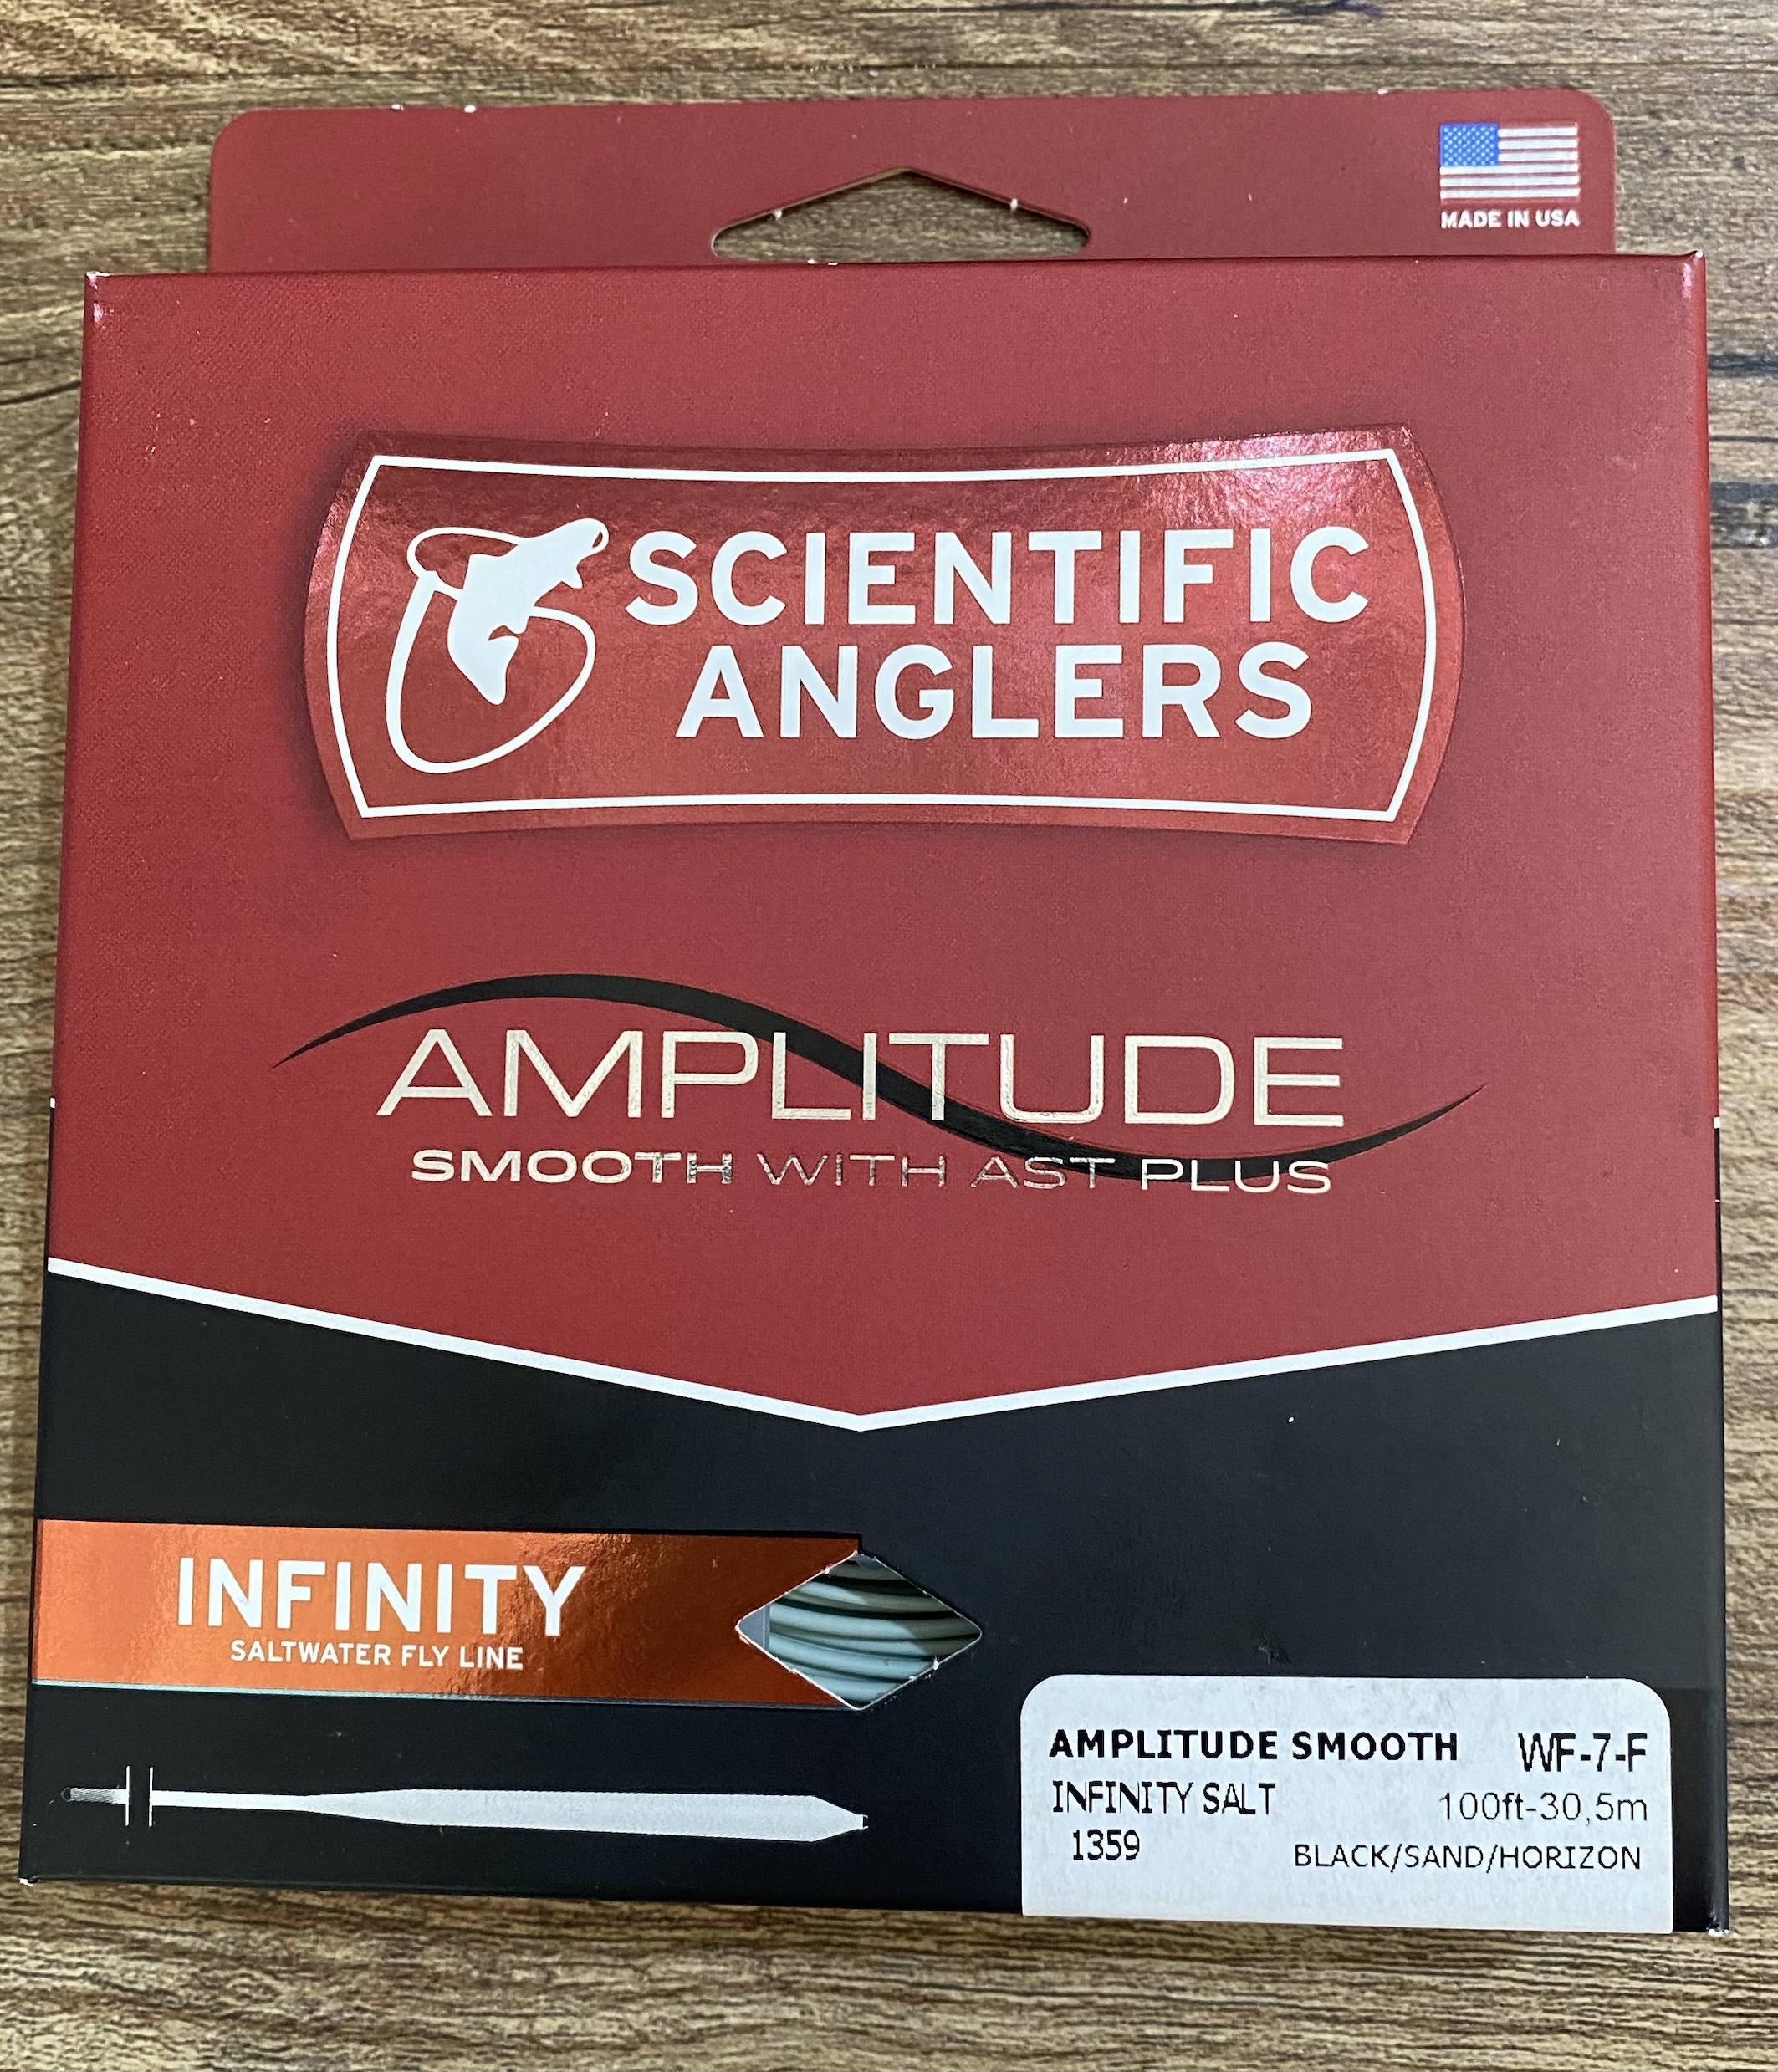 Scientific Anglers Amplitude Smooth Infinity Salt Floating Fly Line